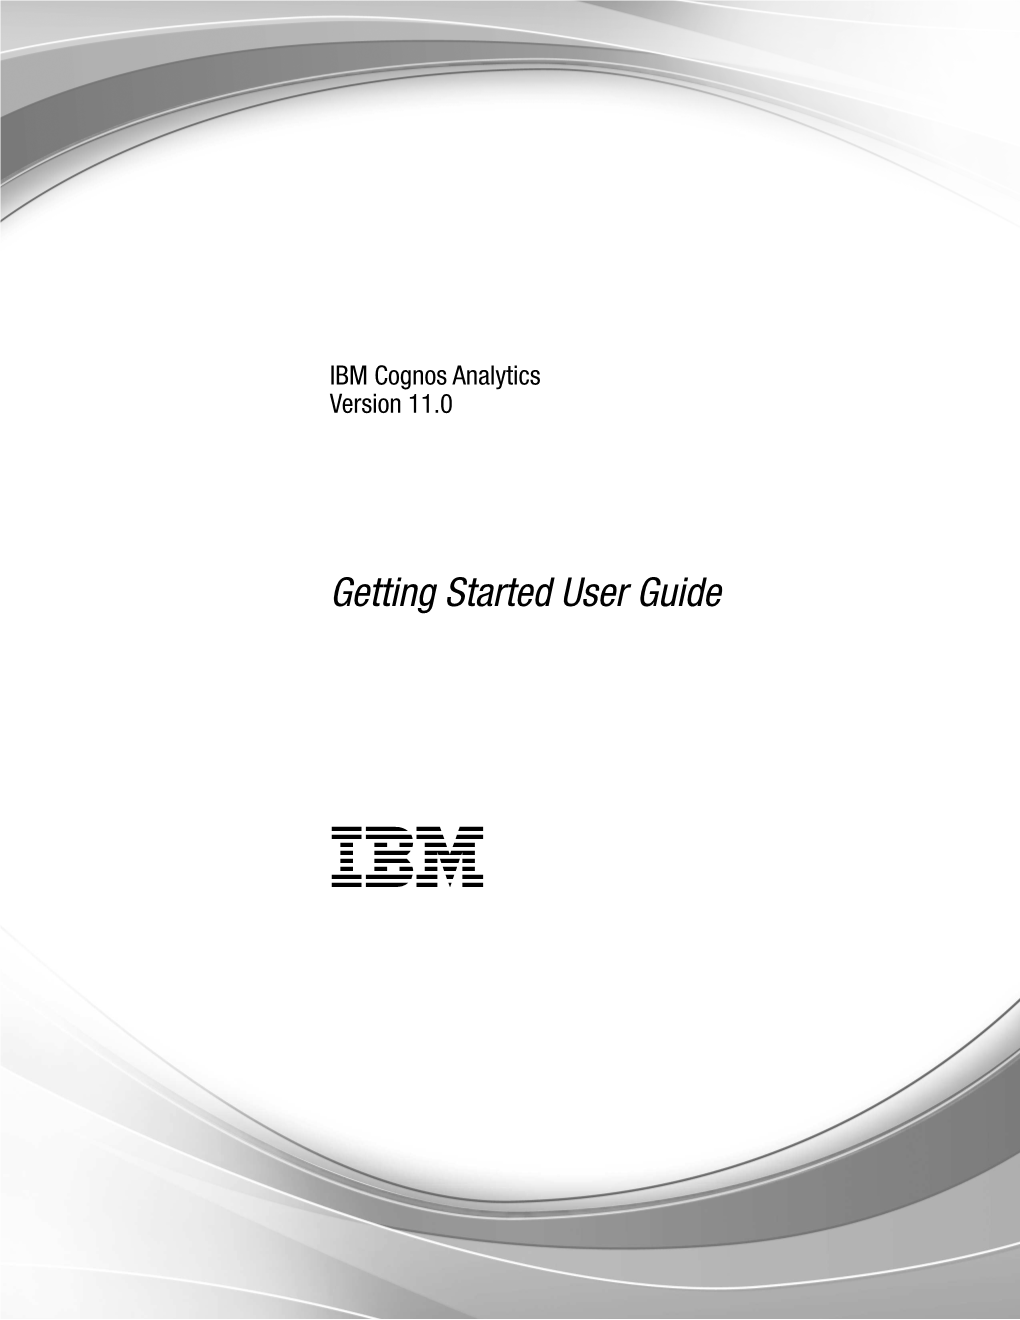 IBM Cognos Analytics Version 11.0: Getting Started User Guide Chapter 1